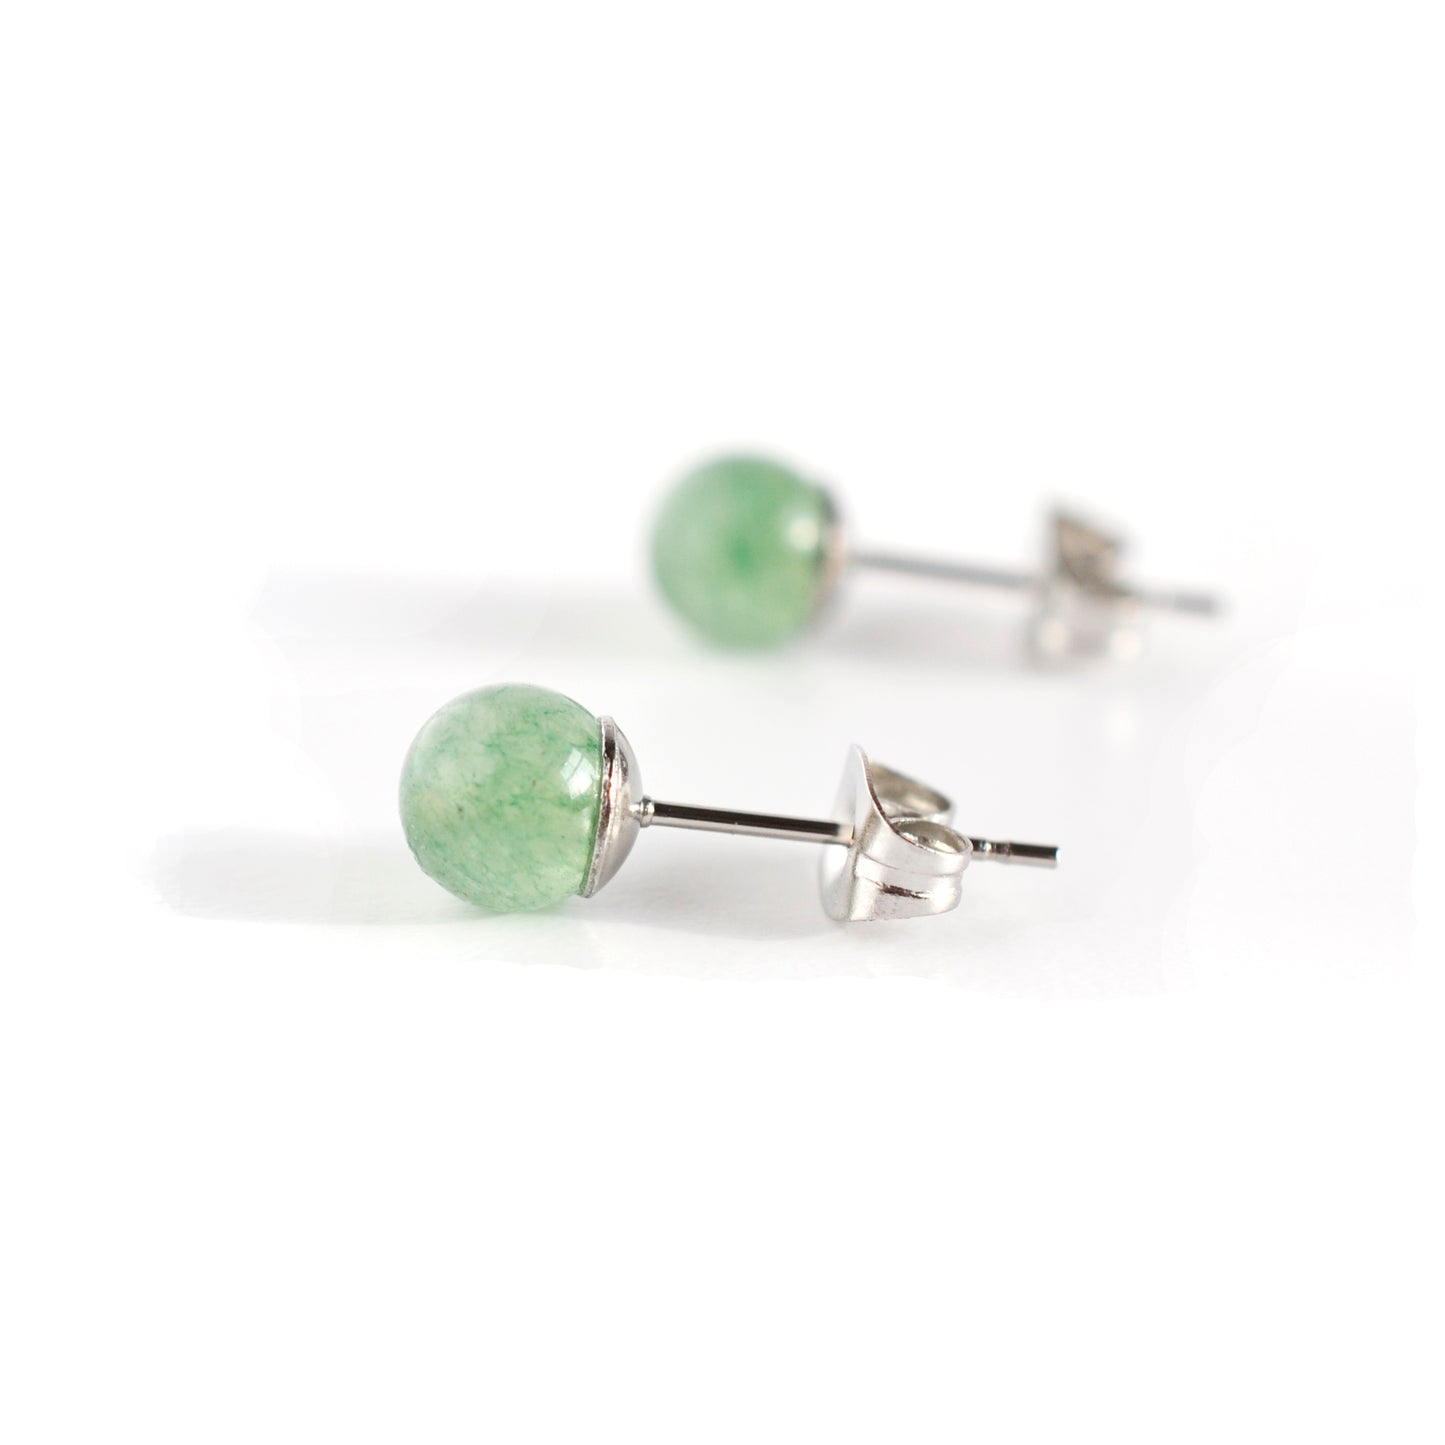 Side view of Green Aventurine earrings with hypoallergenic surgical steel studs and backs